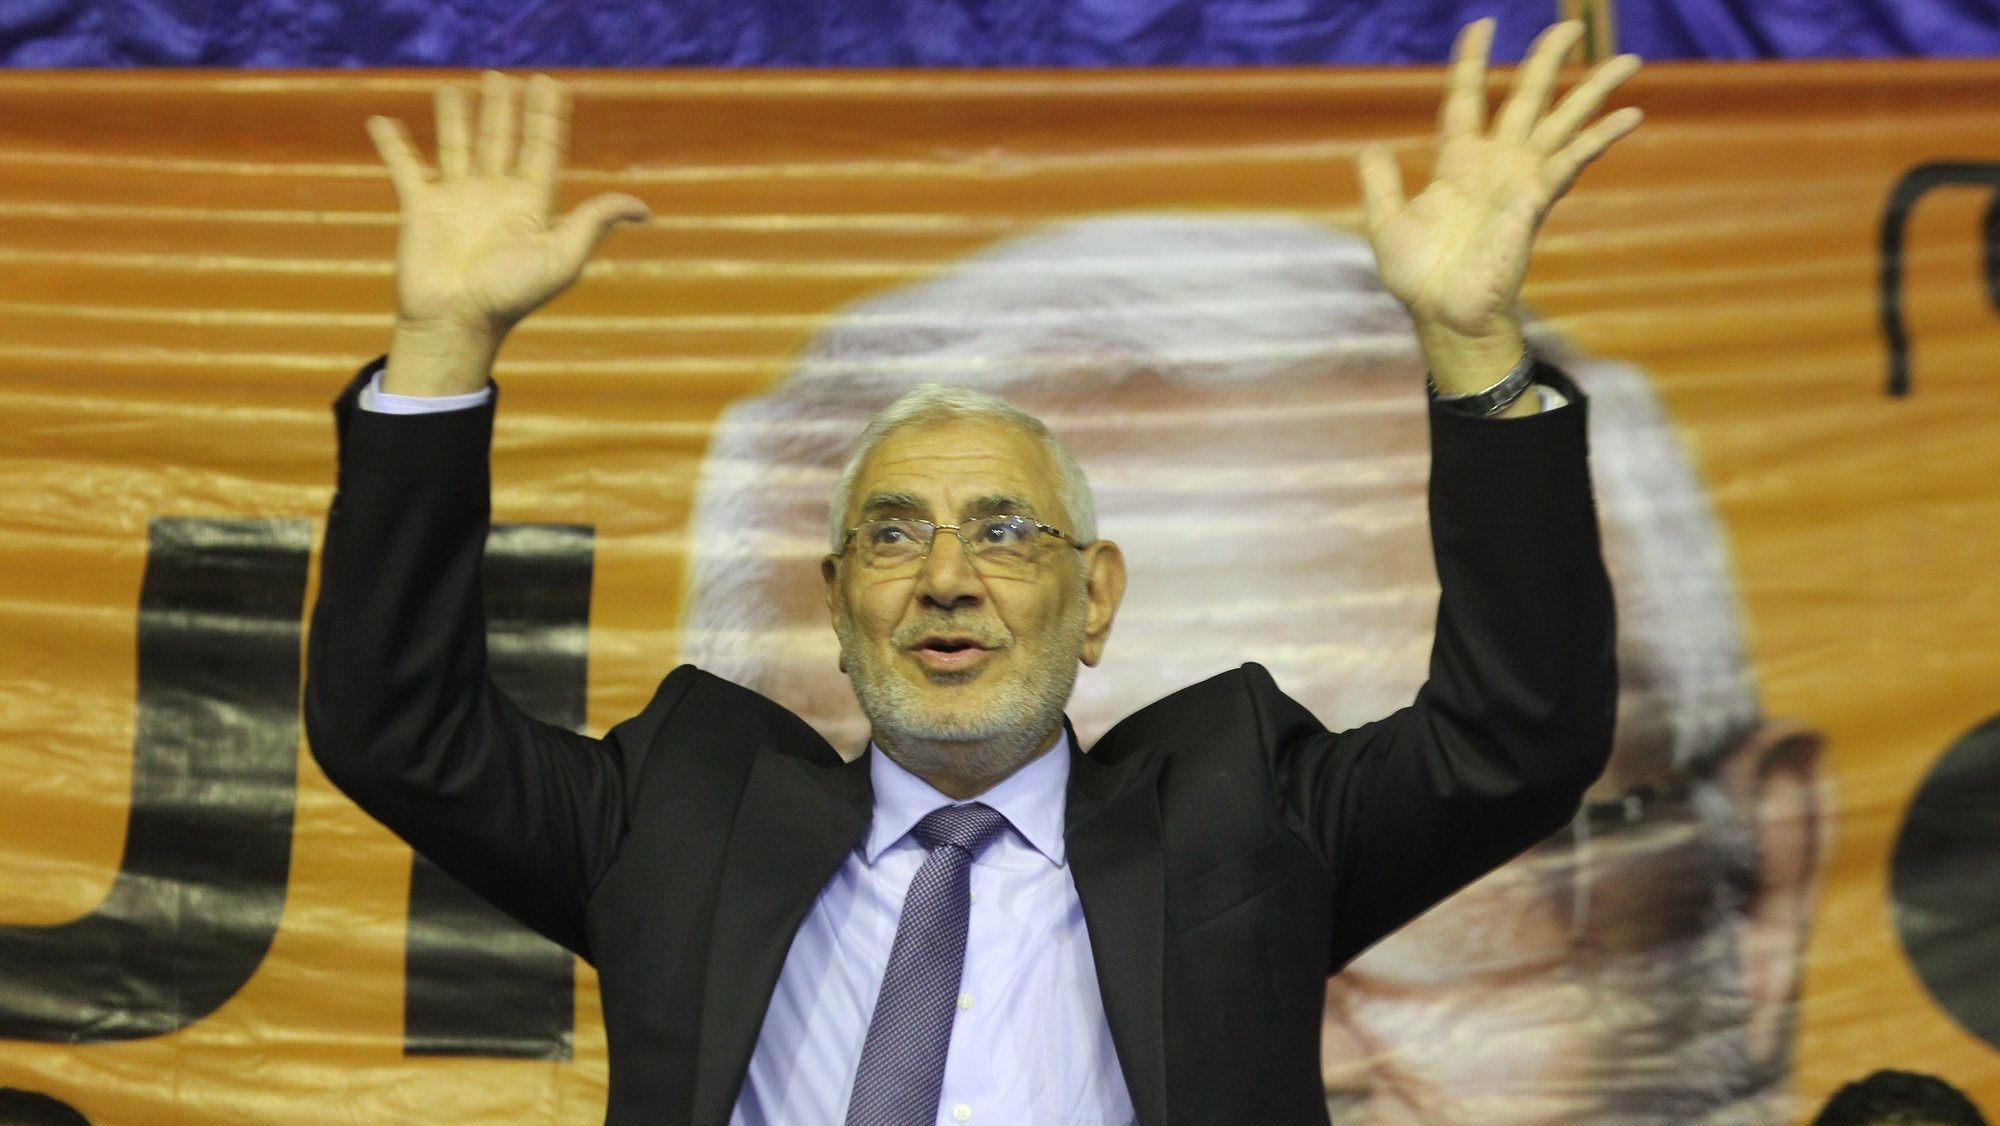 epa06529056 (FILE) - Egyptian presidential hopeful, Abdel moneim Abu al-Fatuh waves to crowds as he arrives to present his program during a public press conference at Embaba in Giza near Cairo, Egypt, 19 April 2012 (Reissued 15 February 2018). On 14 February 2018, the Egyptian Security Forces arrested fromer presidential candidate and current head of the Strong Egypt party Abdel Moneim Aboul Fotouh, for alleged ties with the banned Muslim Brotherhood, according to state owned Middle East News Agency.  EPA/KHALED ELFIQI *** Local Caption *** 50307300